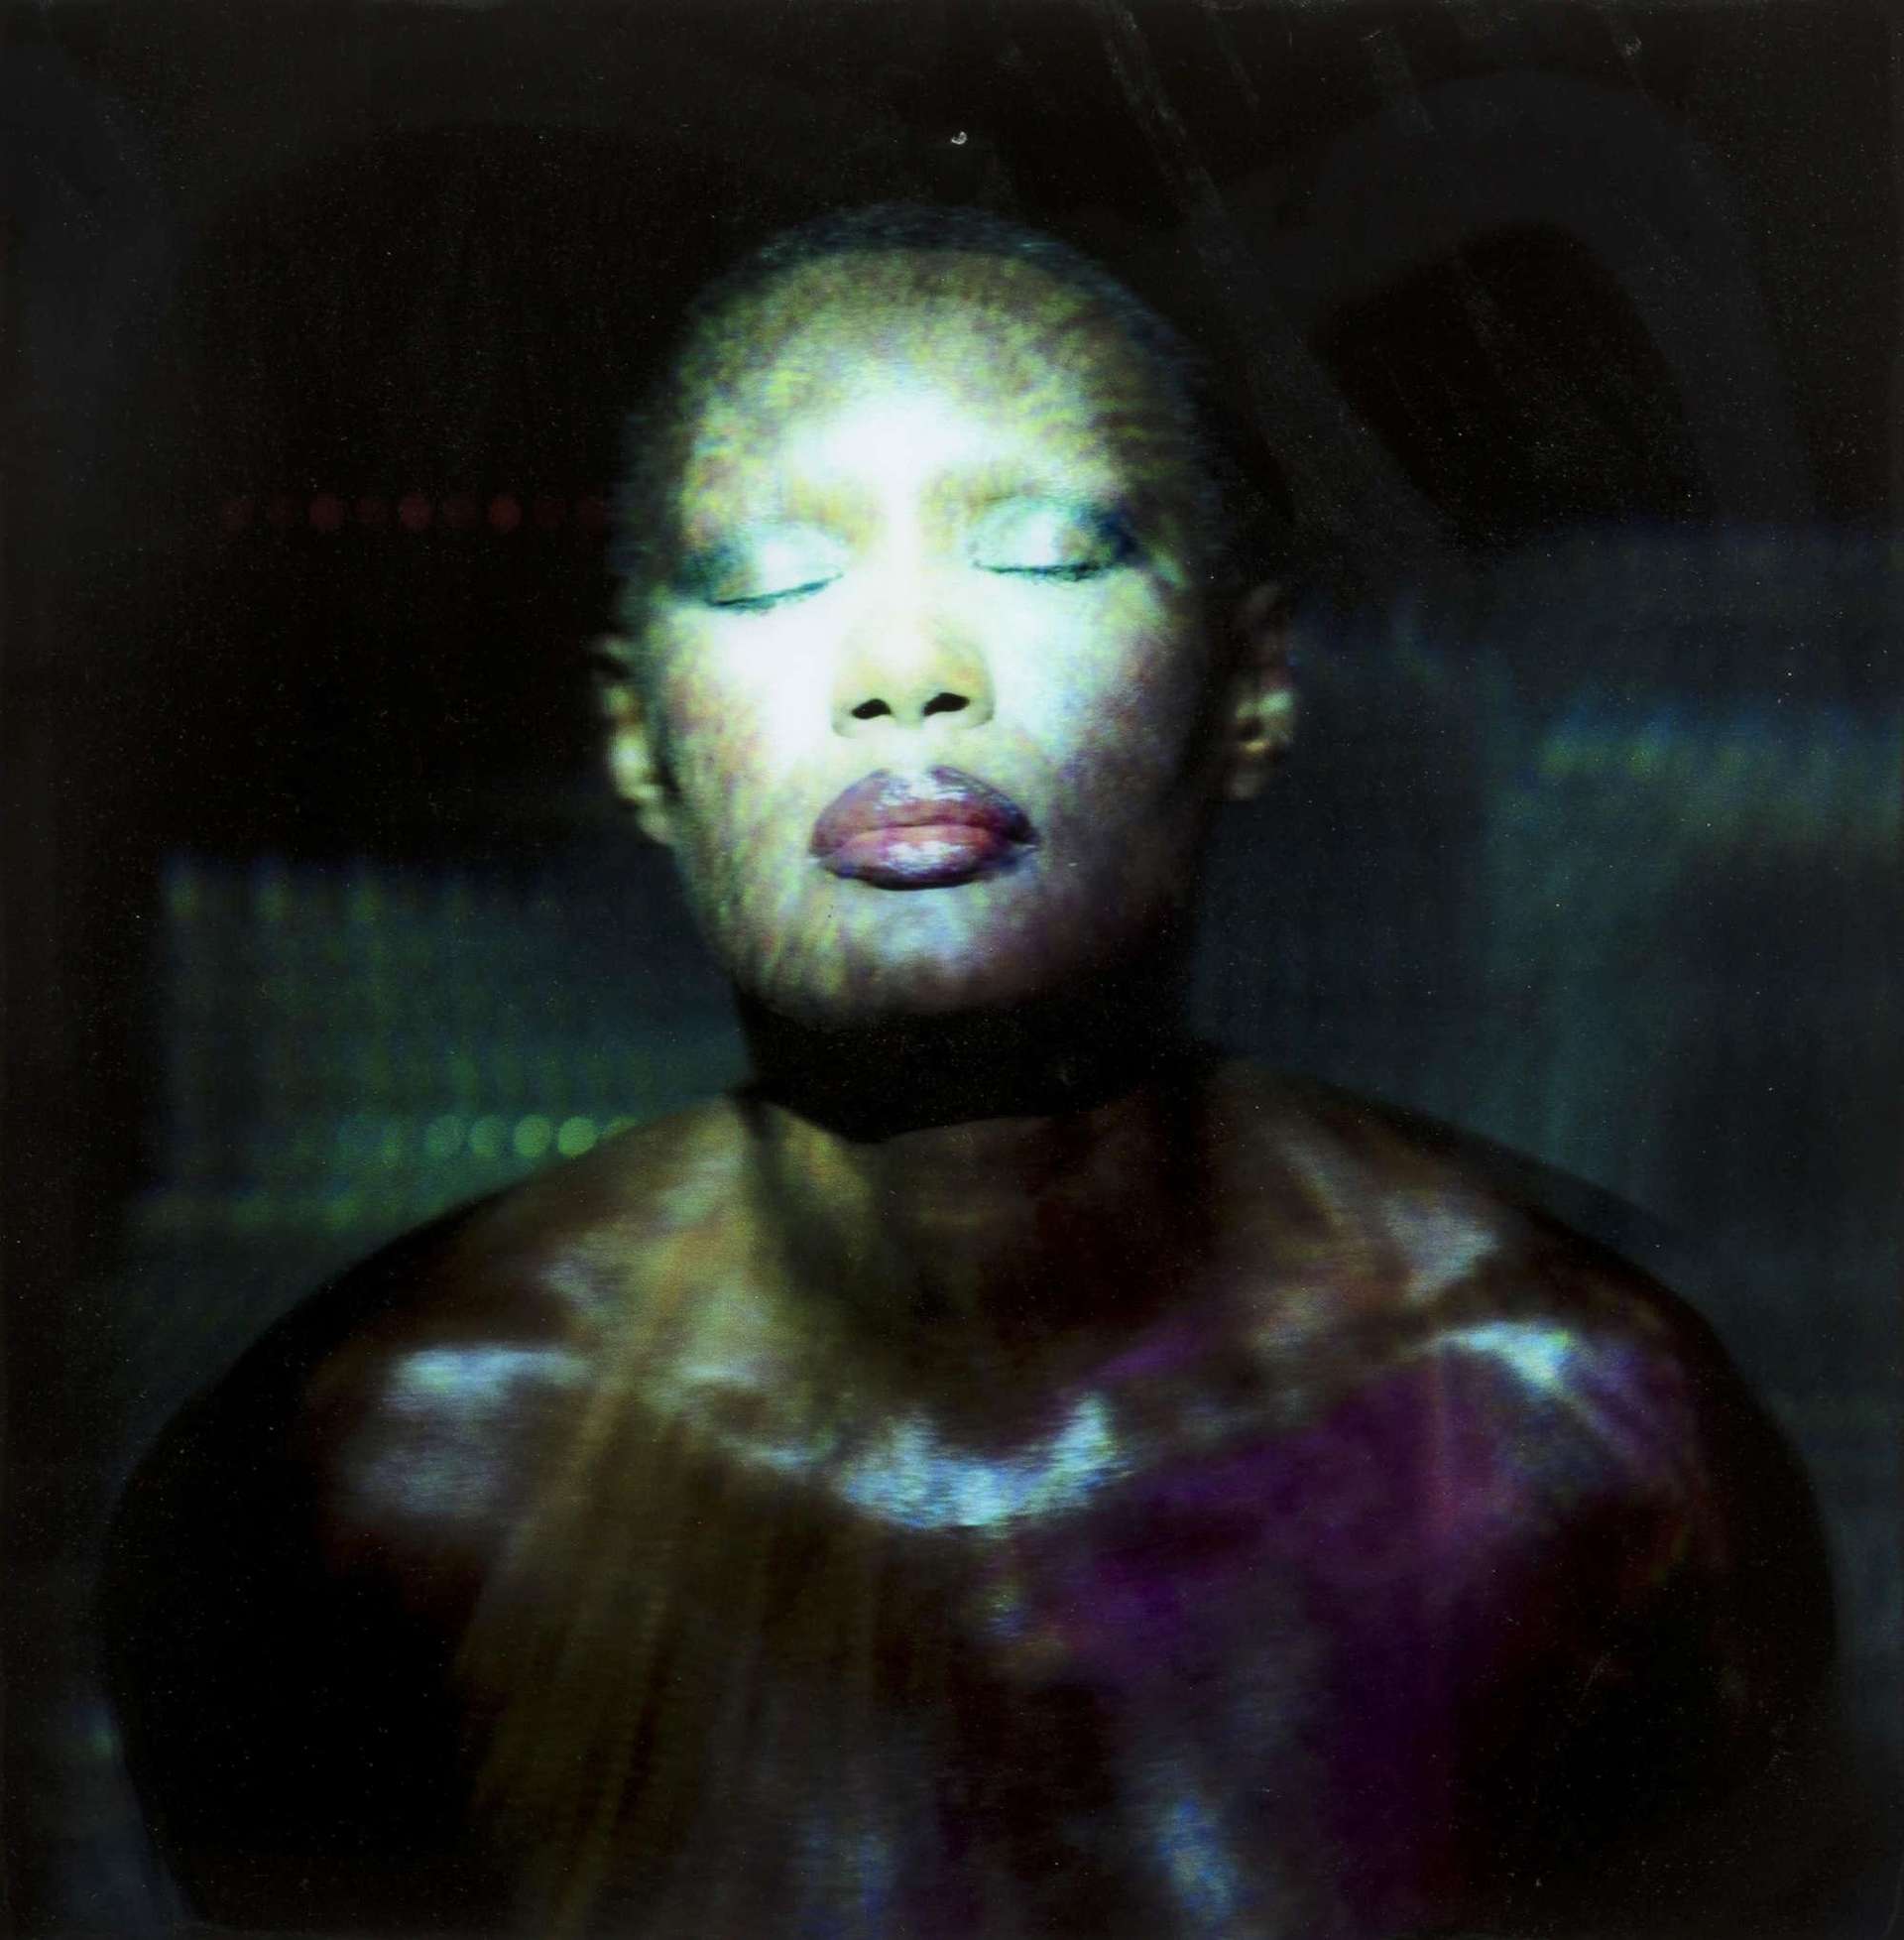 This portrait shows icon Grace Jones, facing up at the camera with her eyes closed. She is illuminated by distorted lights.